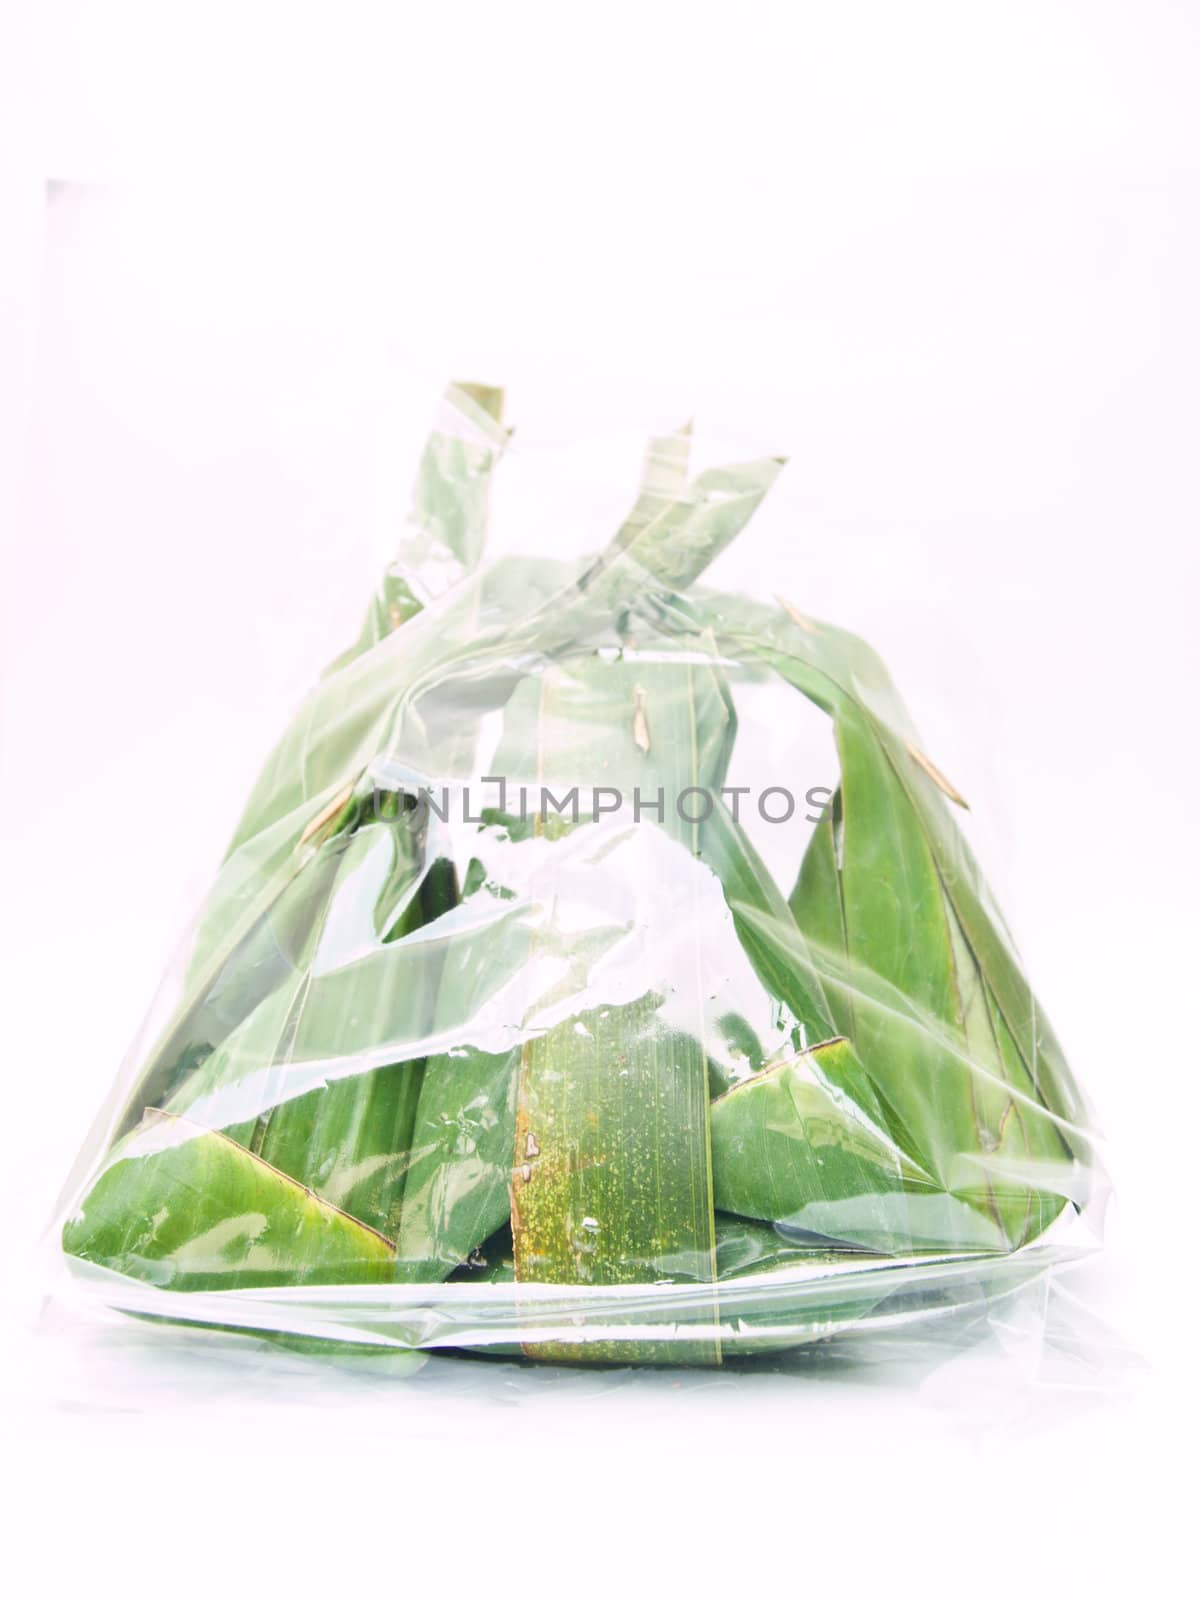 Thai dessert packages made from banana leaves